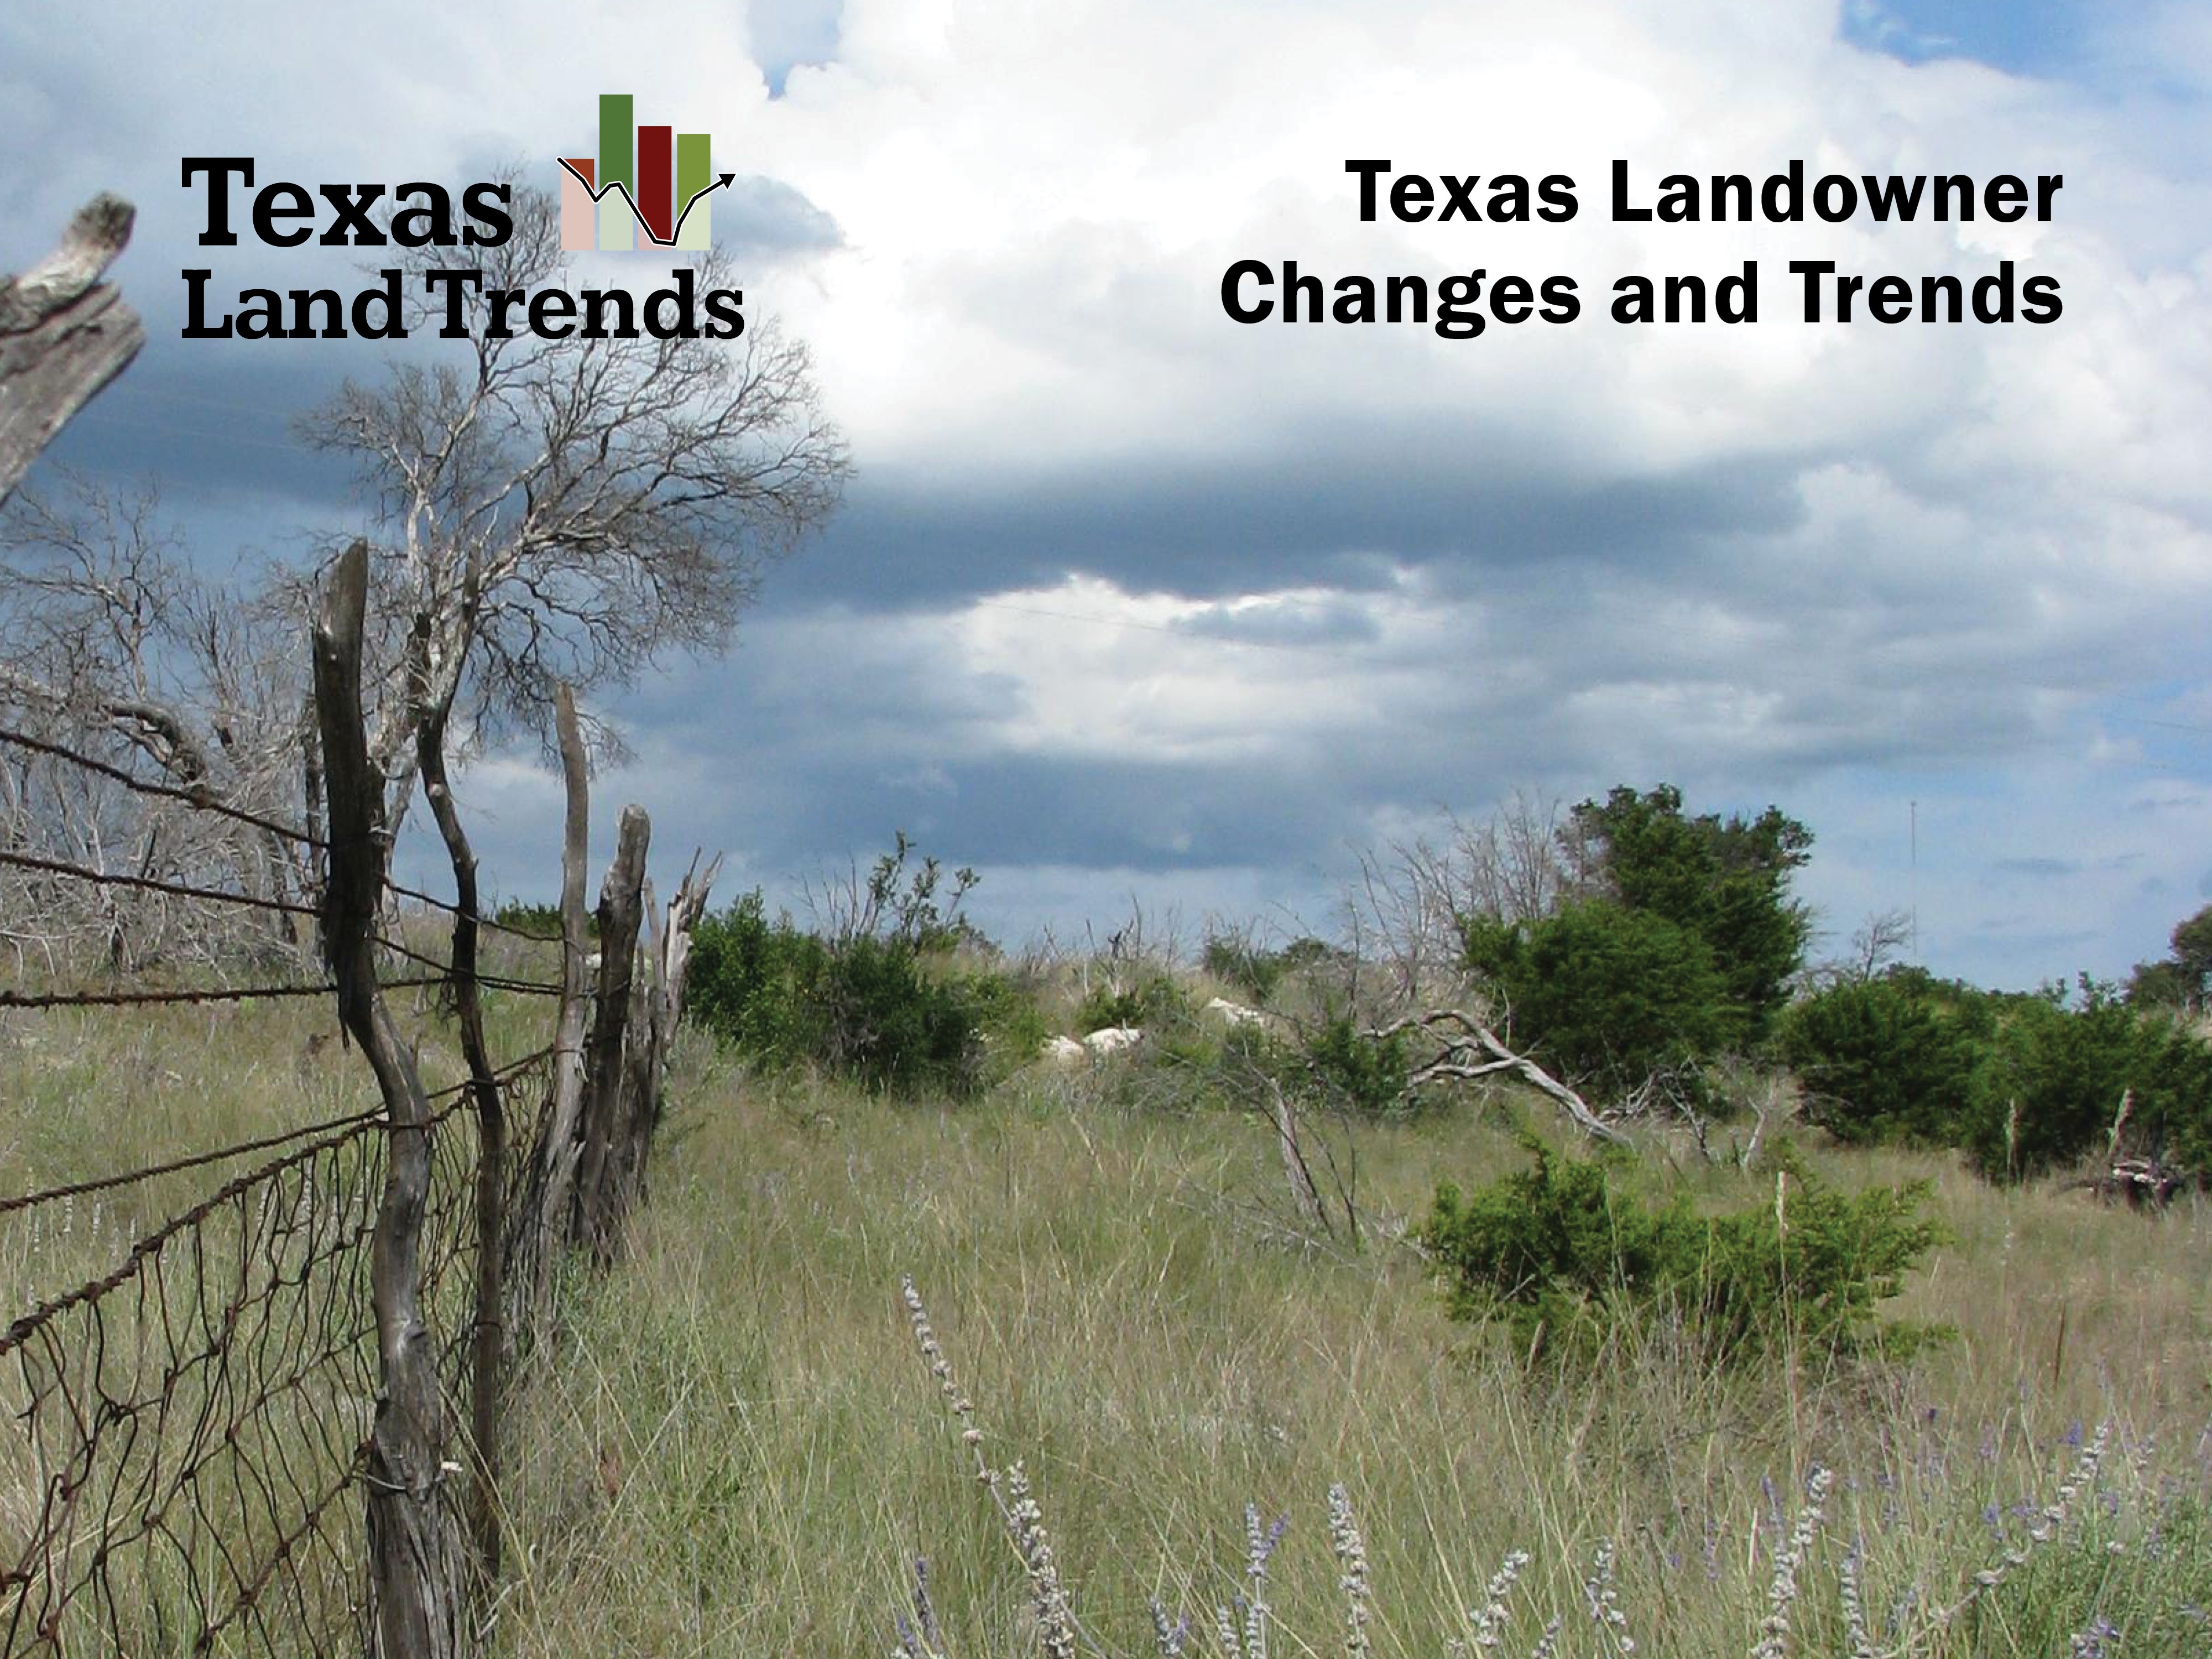 Texas landowner changes and trends